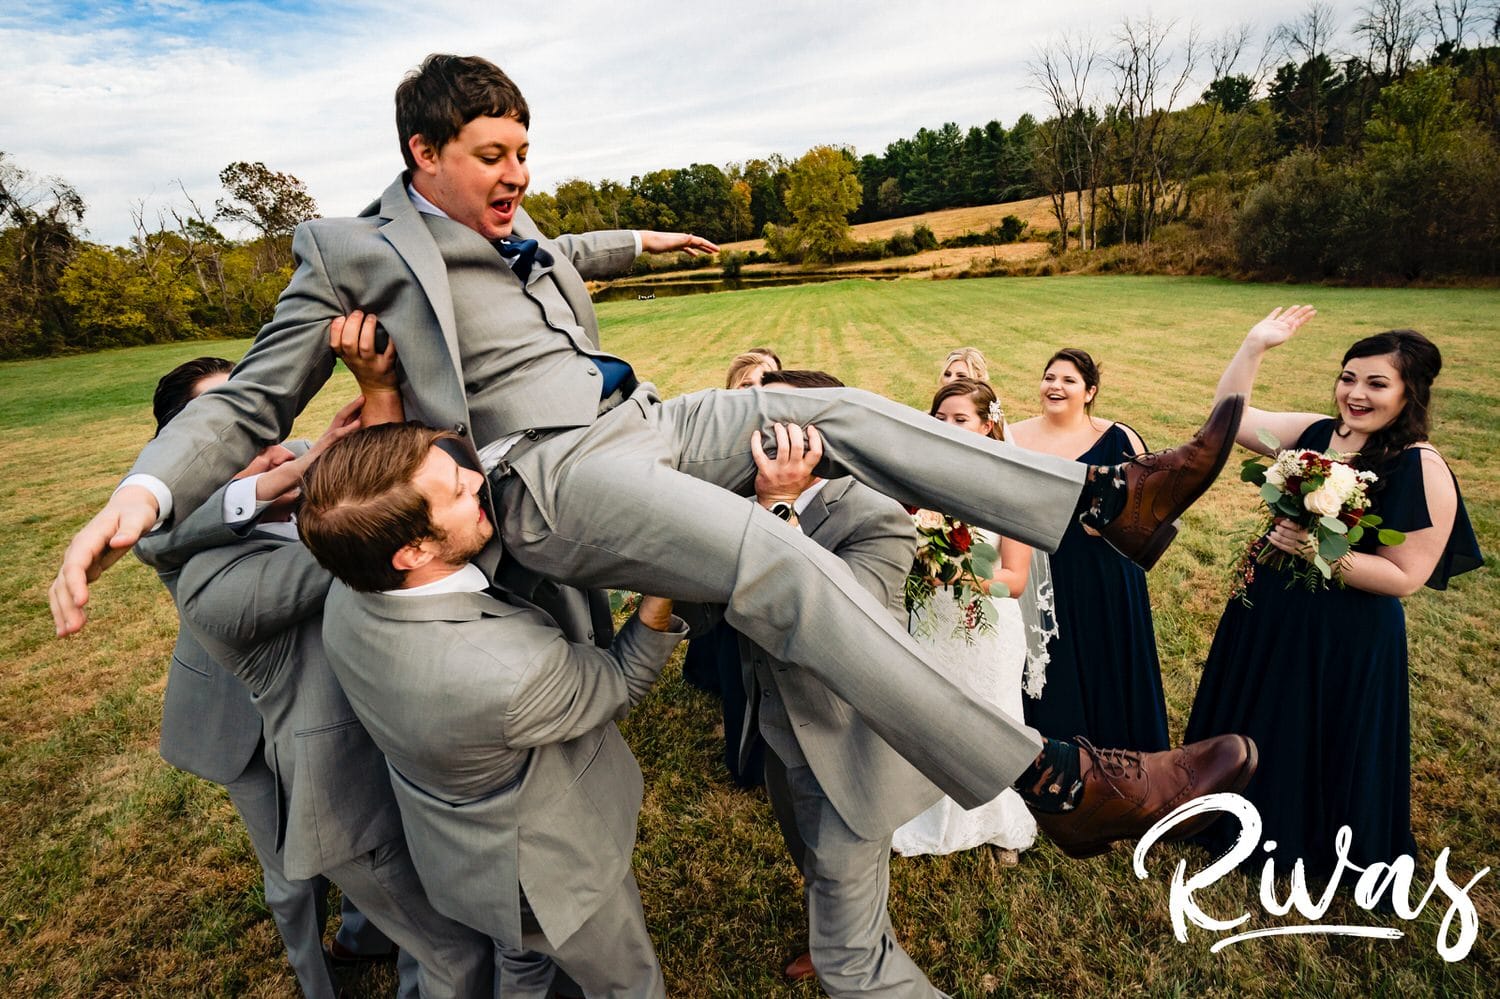 A colorful, candid picture of a groom's groomsmen lifting him into their air in the middle of a field on his fall wedding day at The Barns at Hamilton Station Vineyard. 